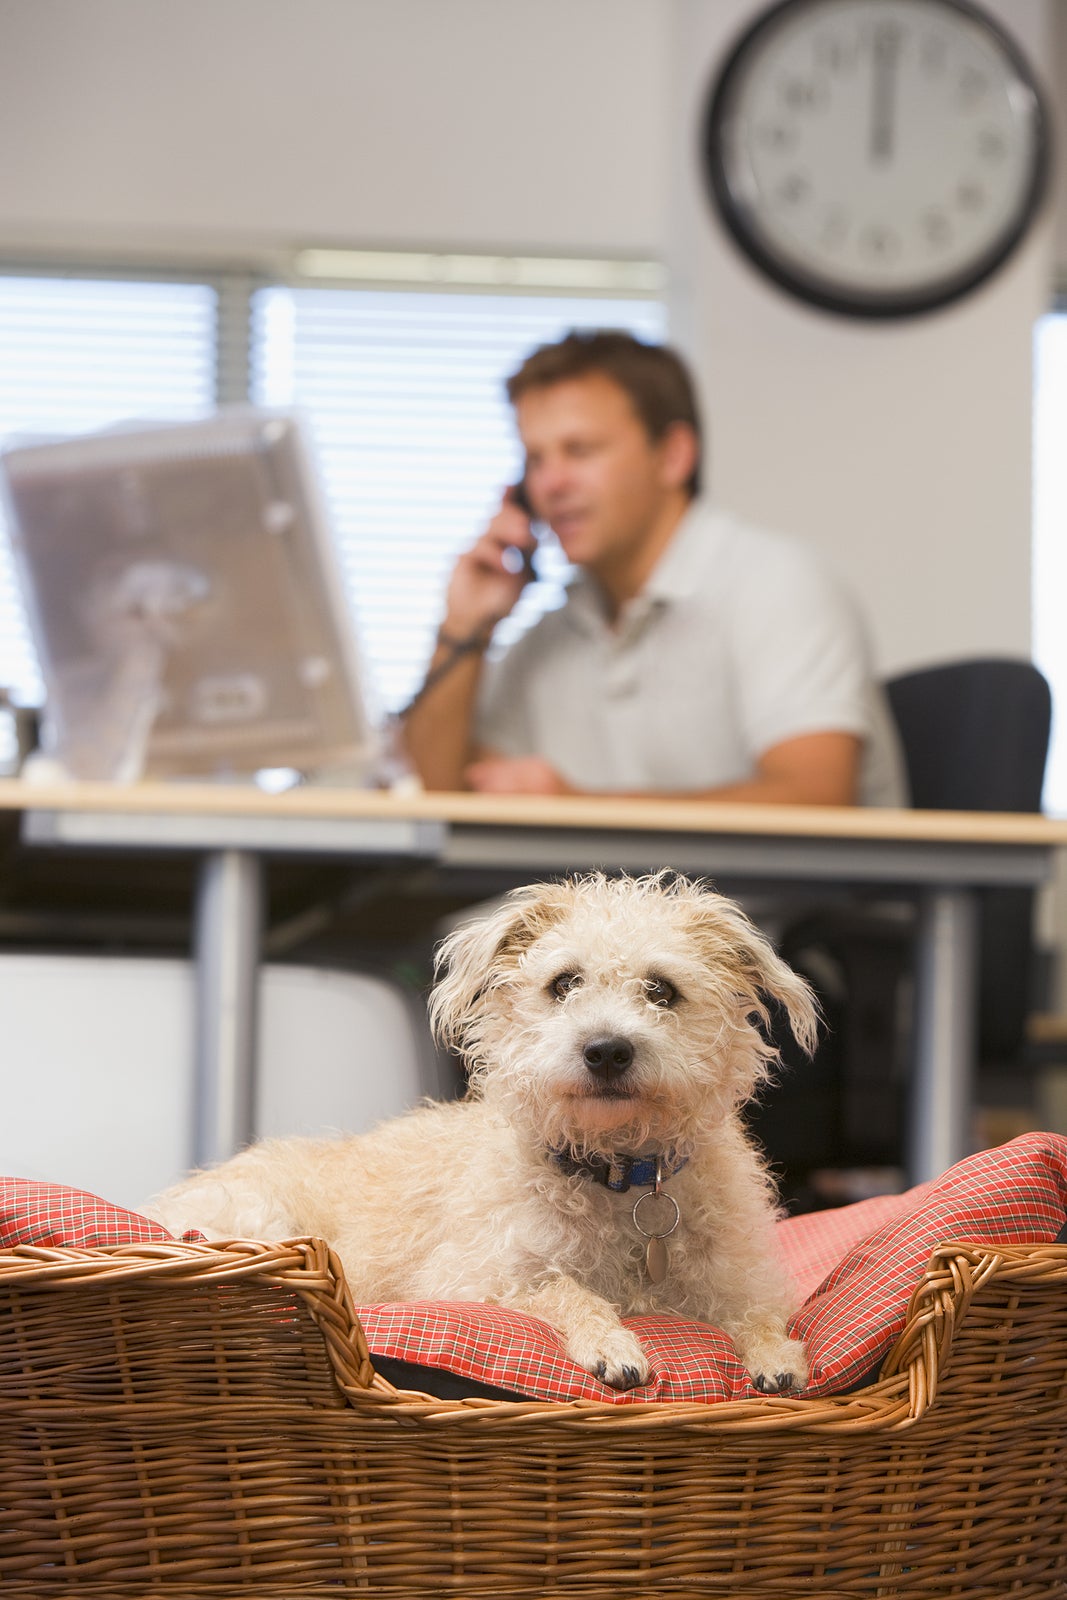 Businessman sat at a desk on the phone with a dog in the foreground in a dog basket